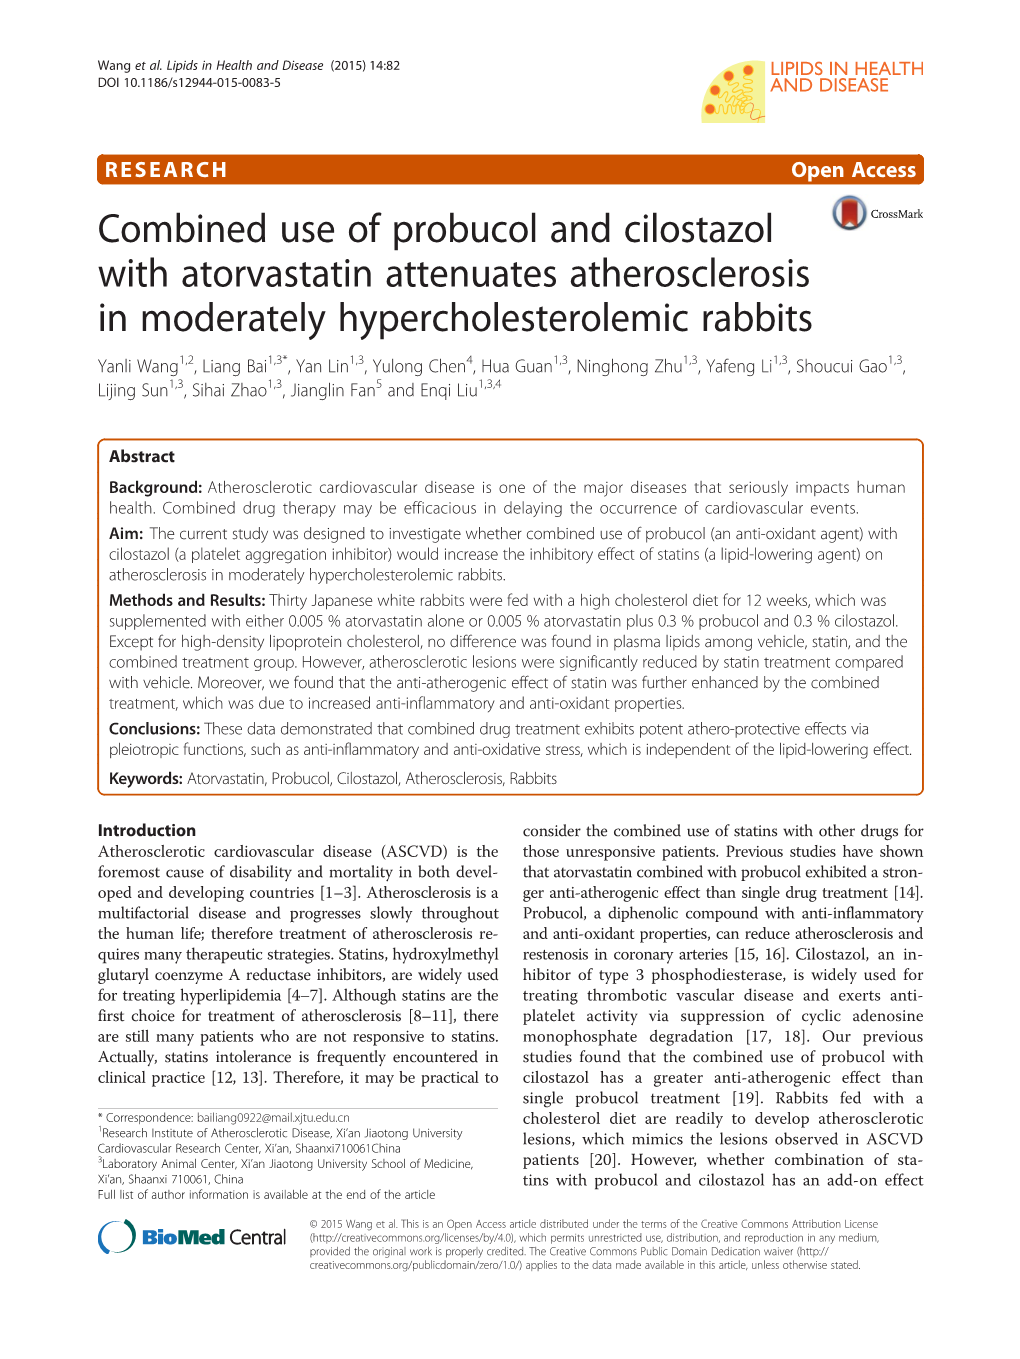 Combined Use of Probucol and Cilostazol with Atorvastatin